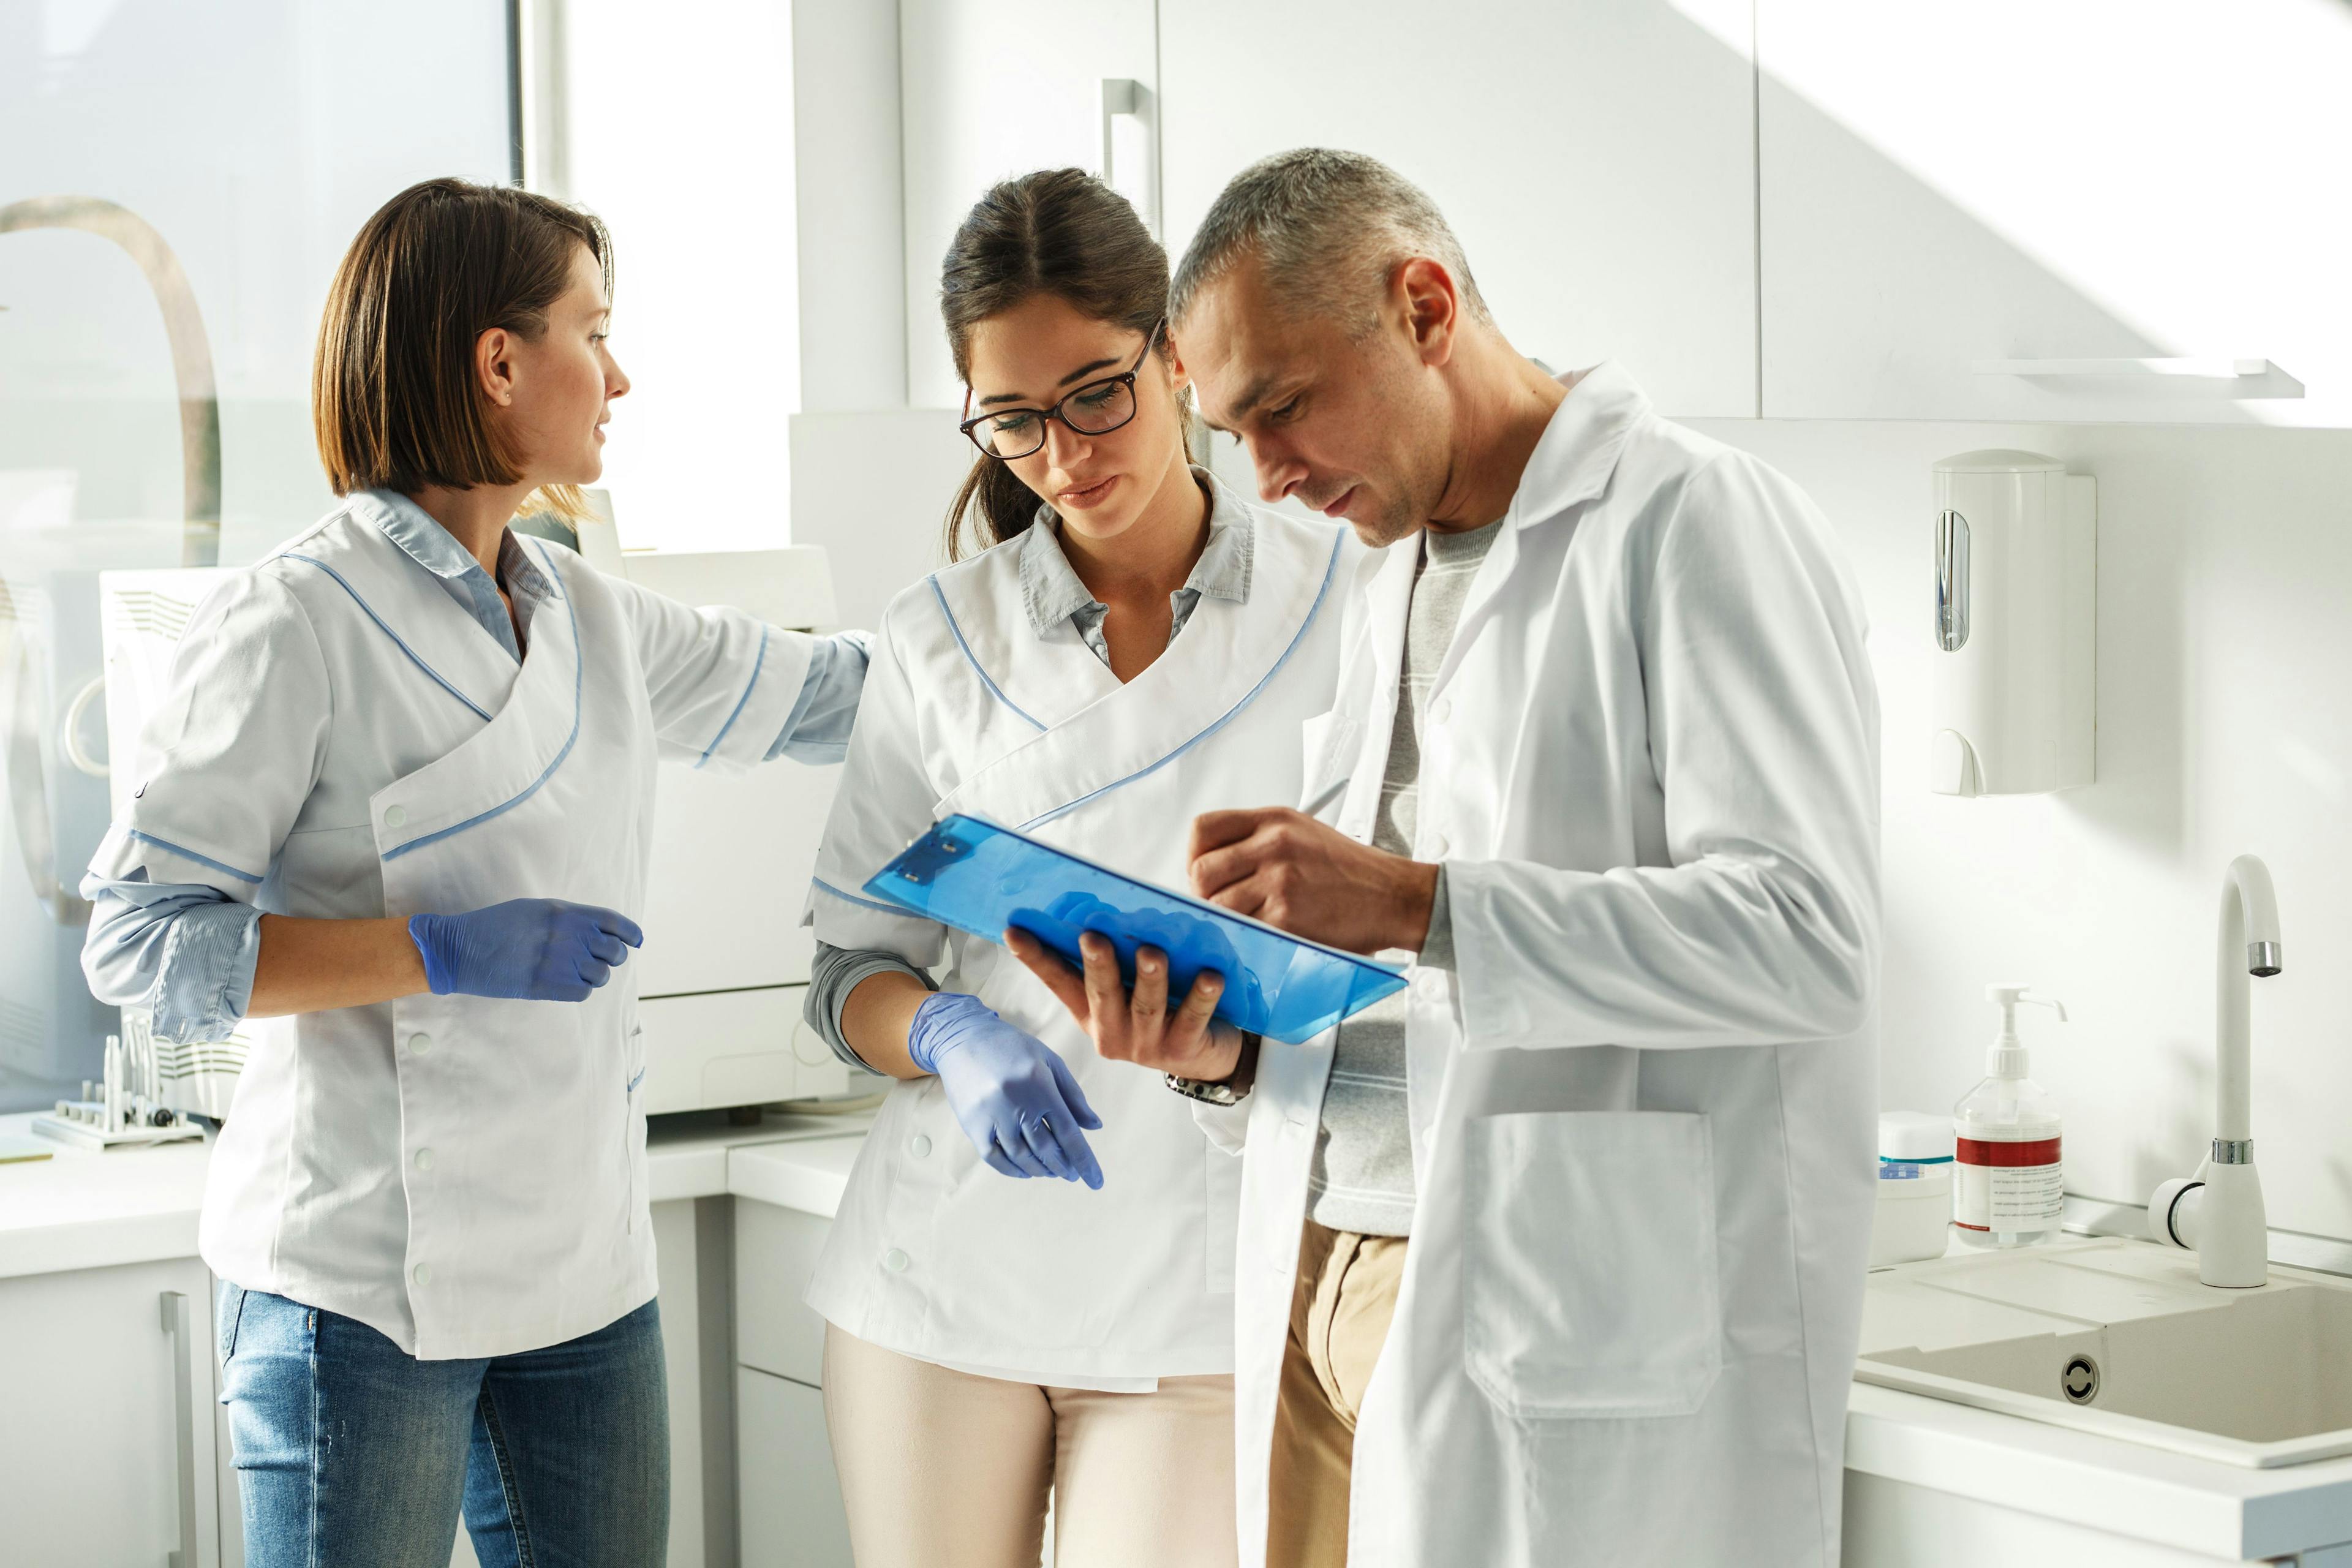 3 dental professionals in a dental office discuss something on a clipboard